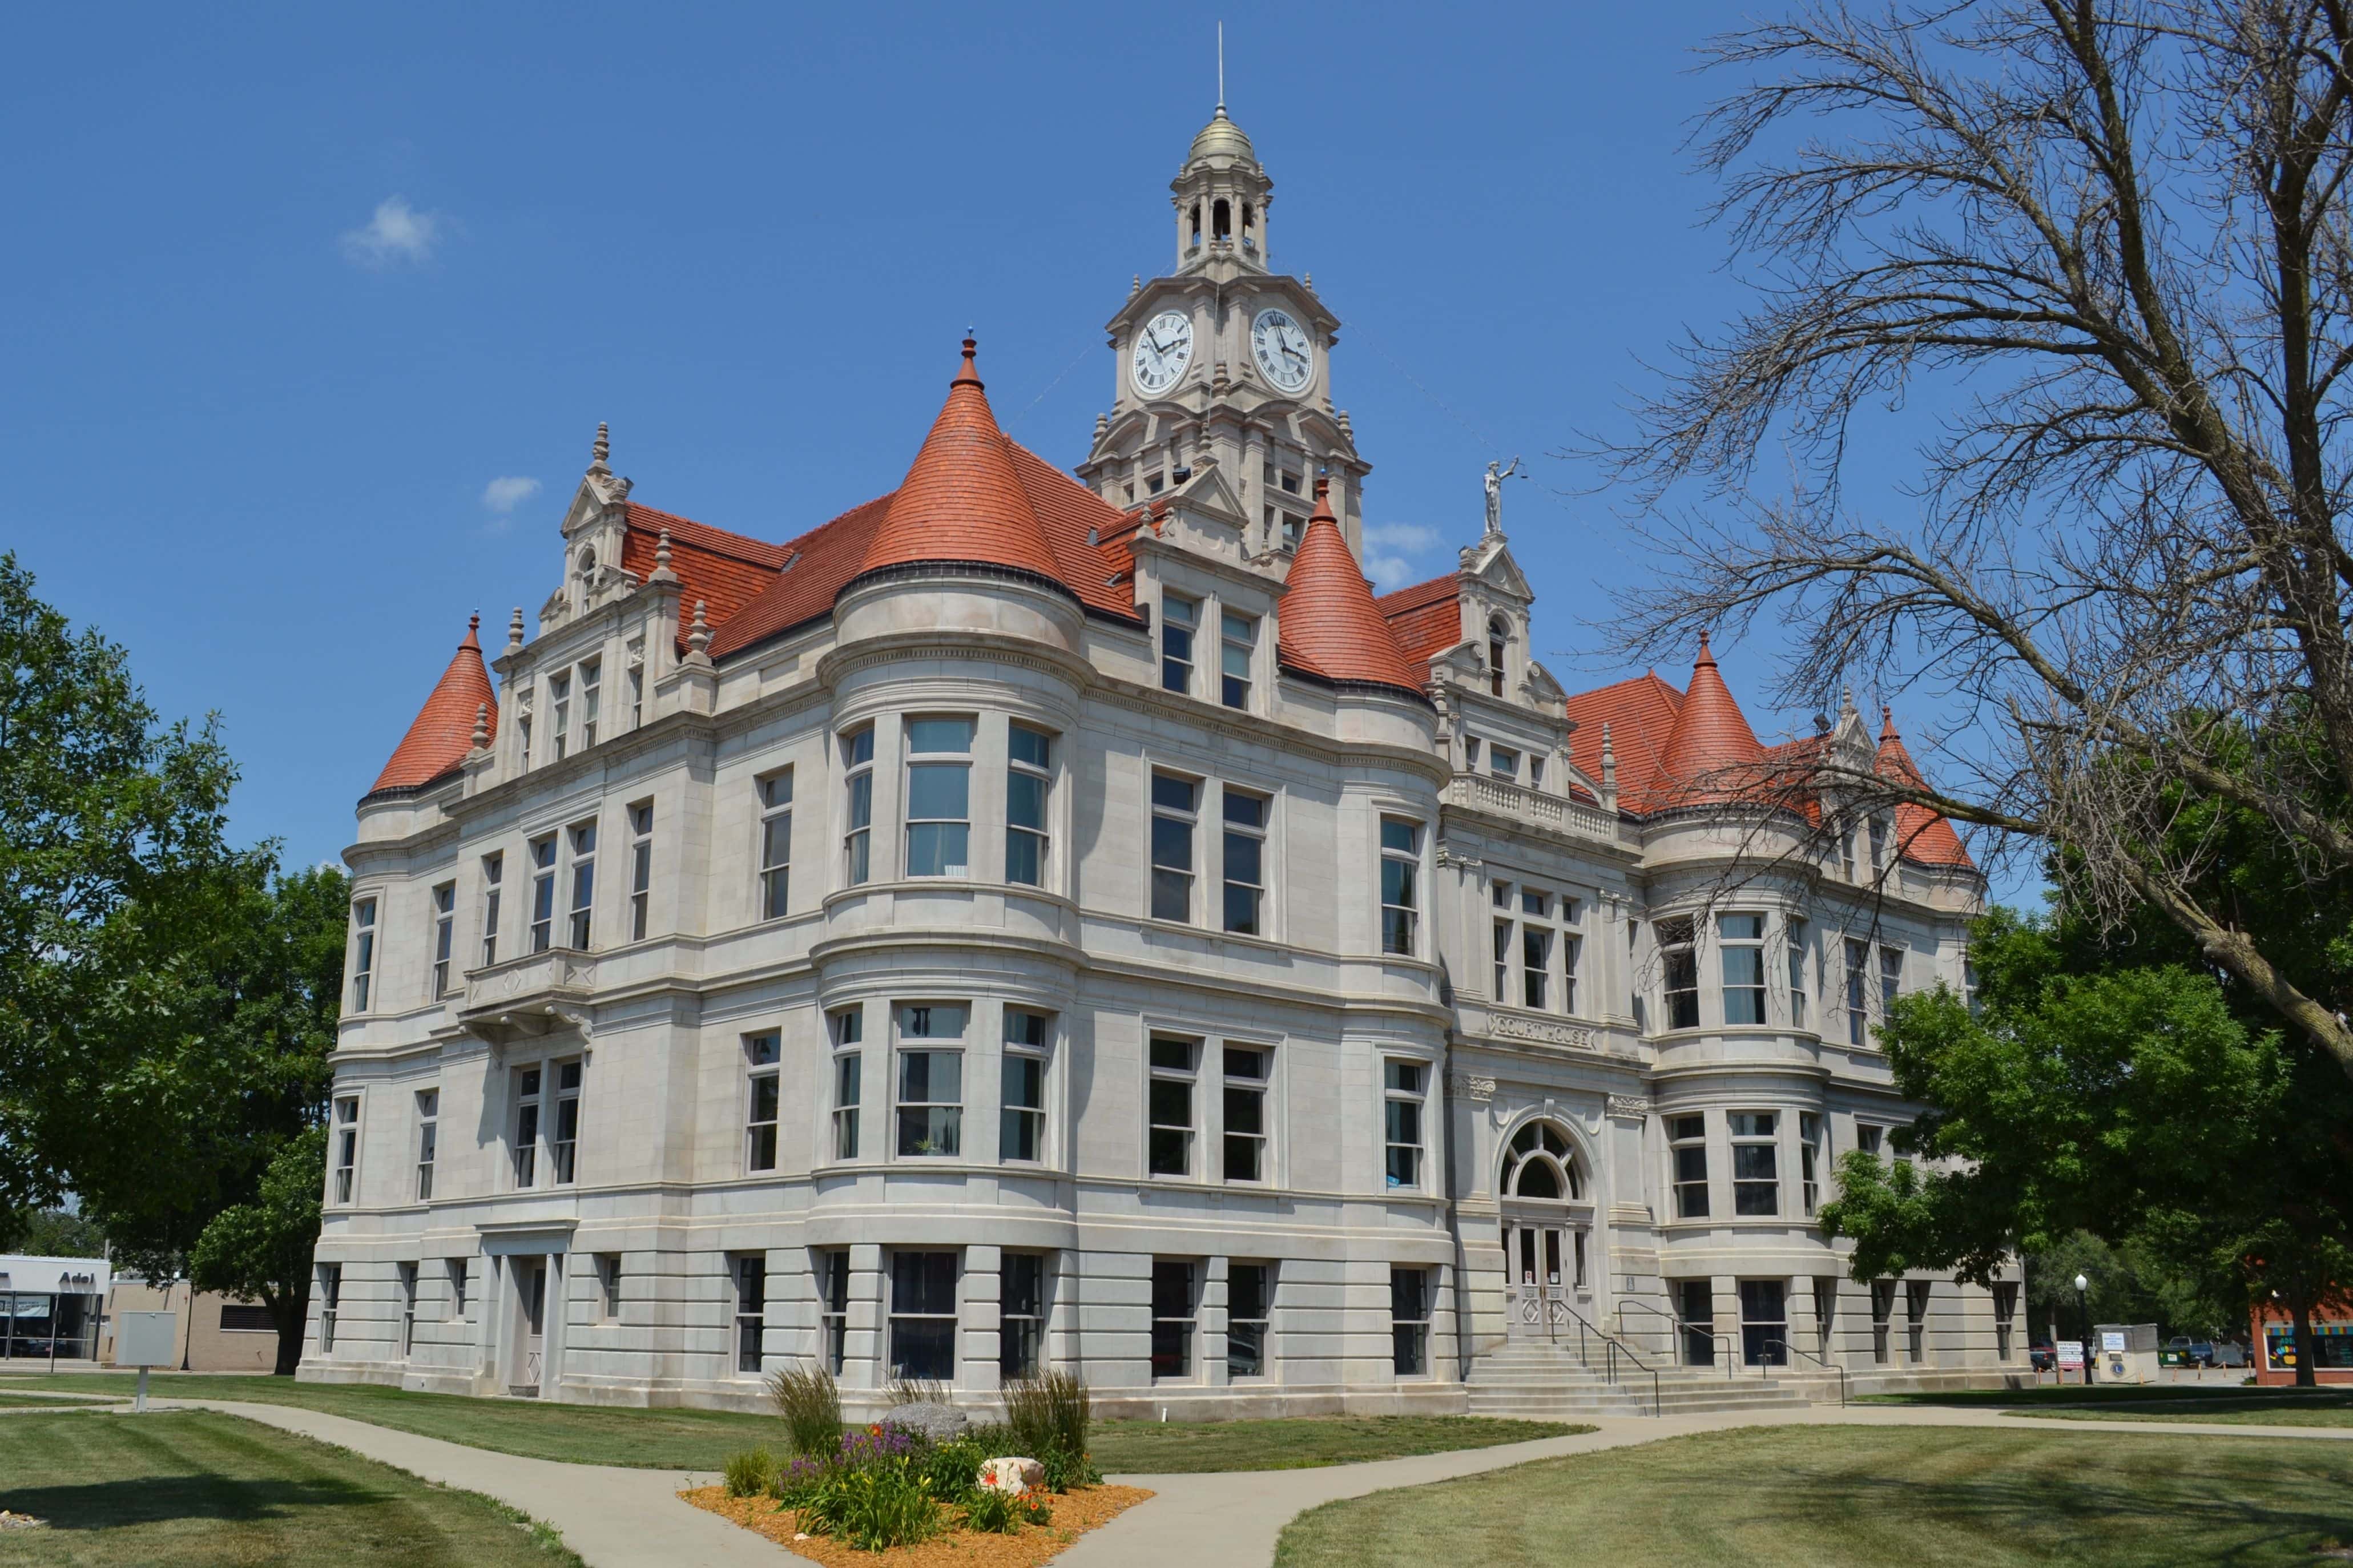 dallas_county_courthouse_adel_iowa_july_4_2013-2